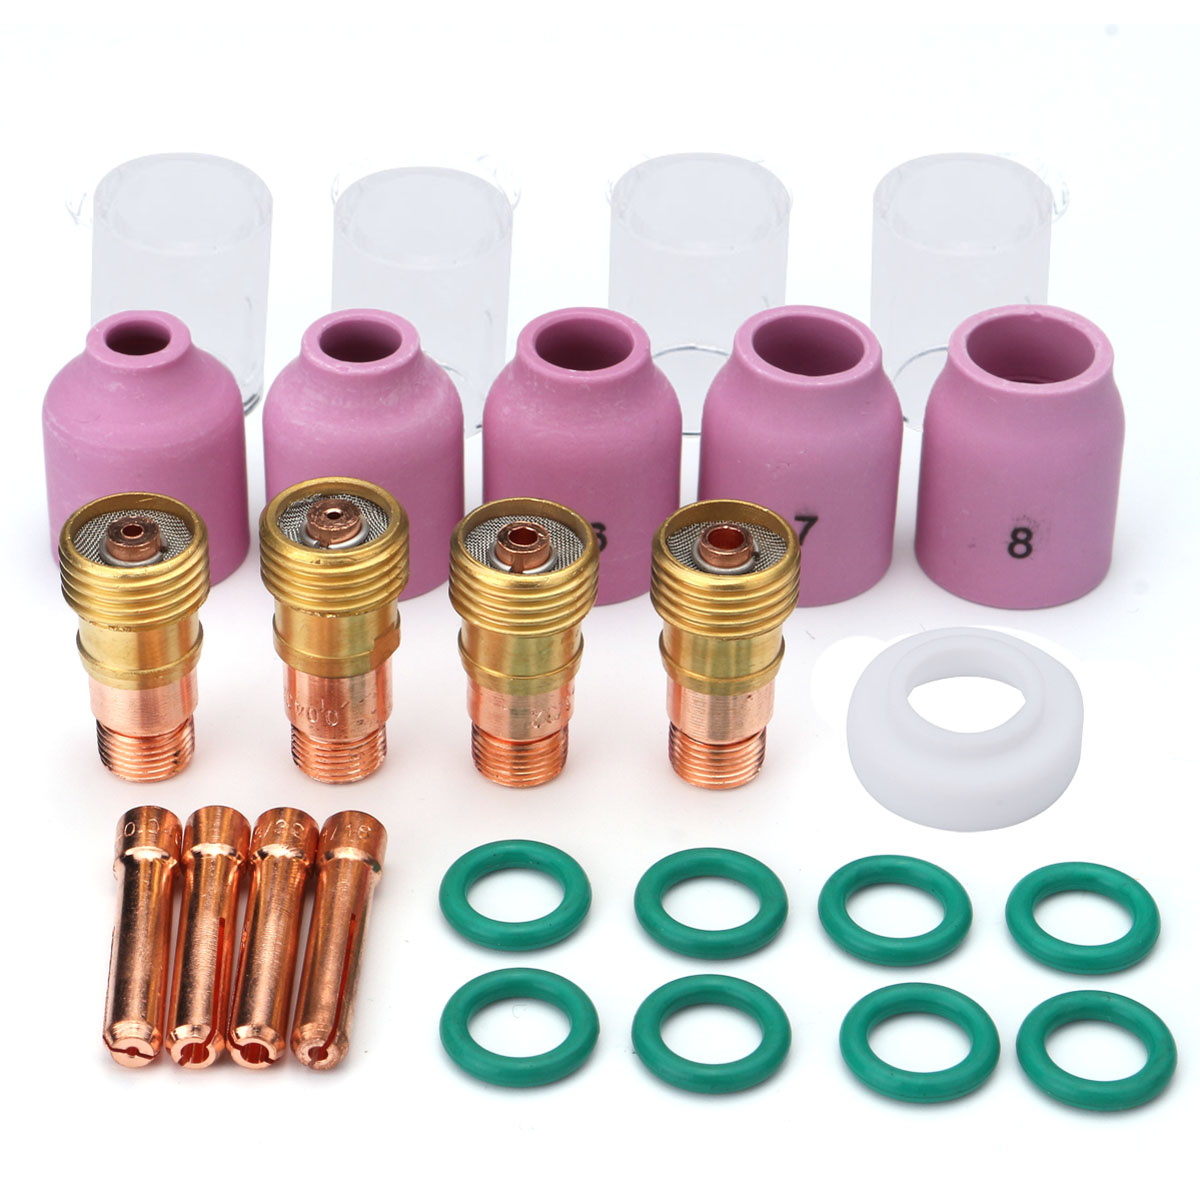 26Pcs-TIG-Welding-Torch-Stubby-Gas-Lens-10-Pyrex-Cup-Kit-for-Tig-WP-171826-Torch-1277462-2